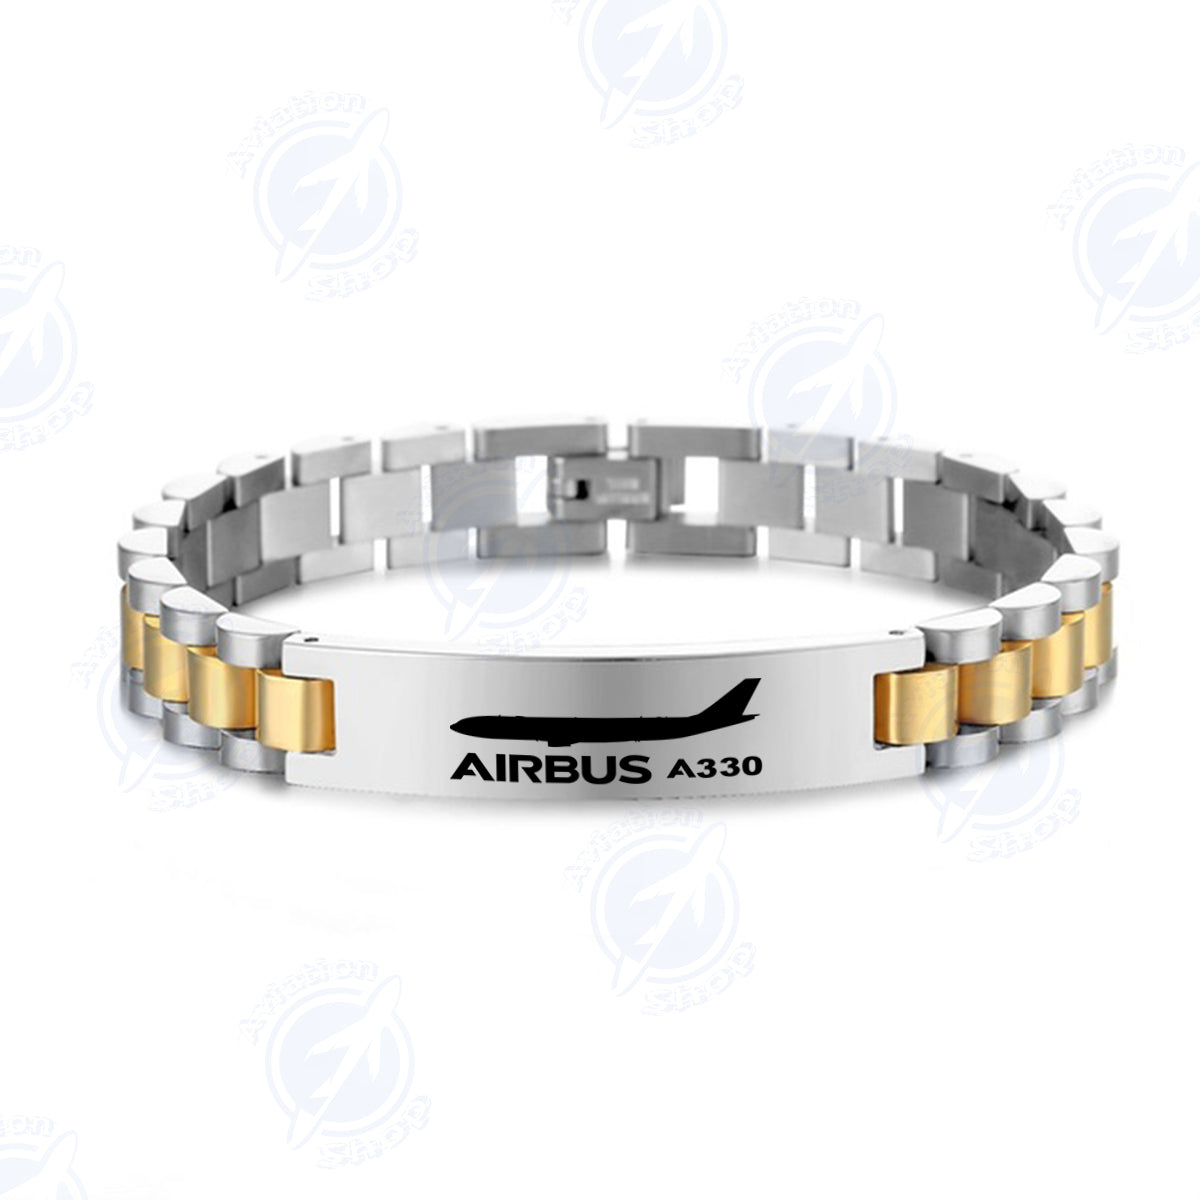 The Airbus A330 Designed Stainless Steel Chain Bracelets